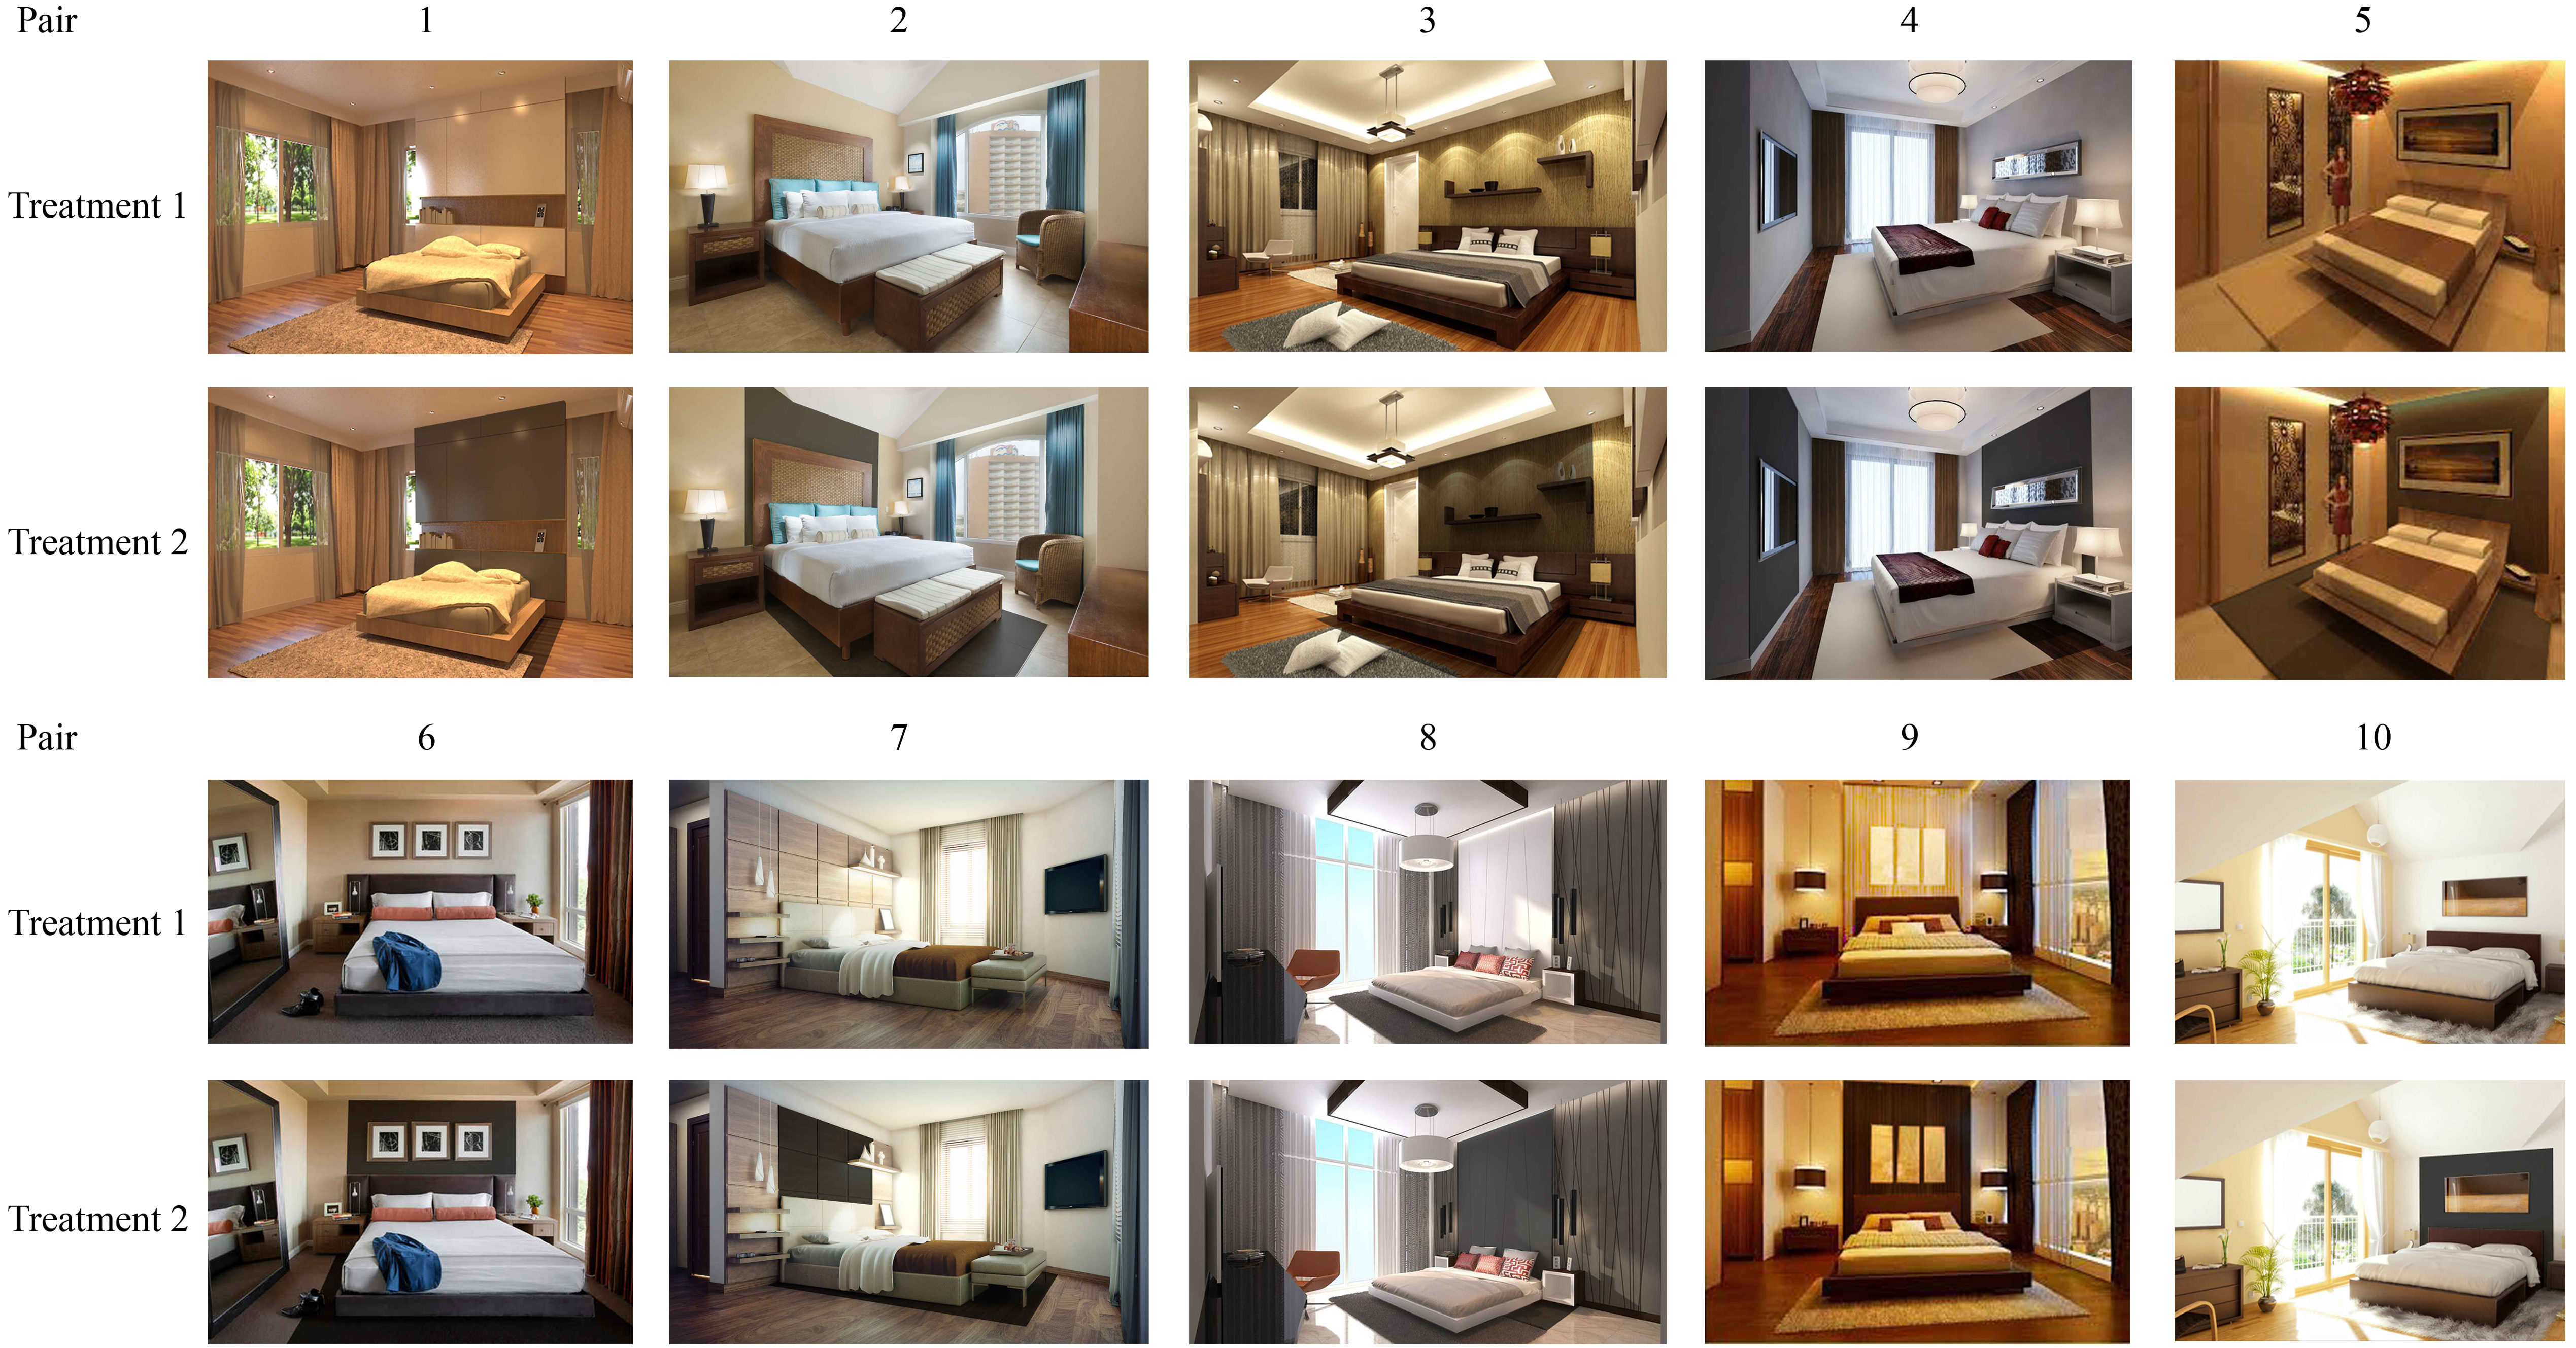 Examples of the test images for the effect of the brightness contrast between the surface and furniture in the second part.